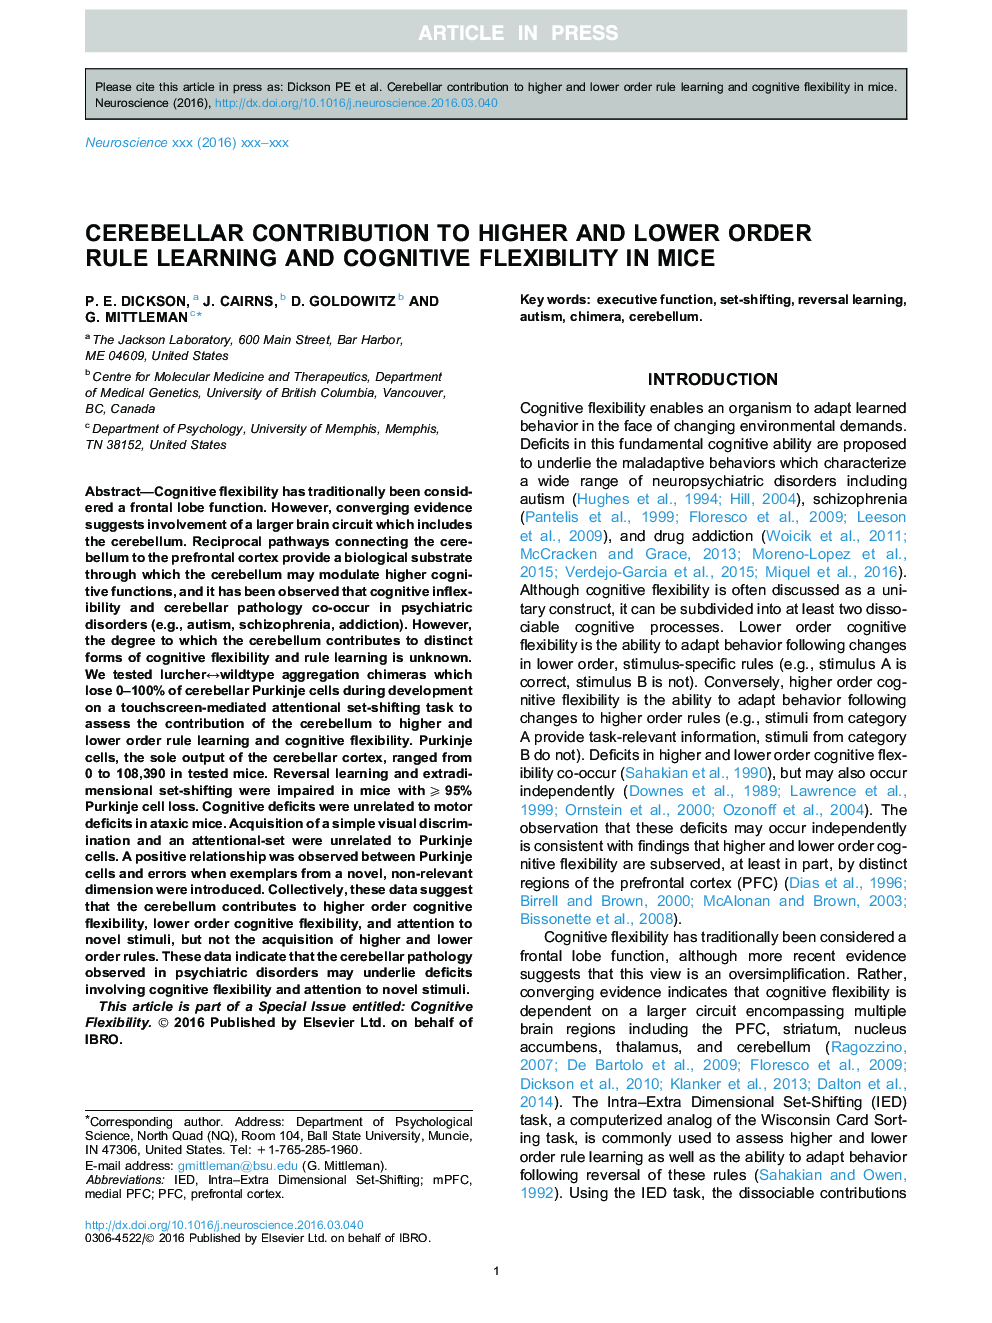 Cerebellar contribution to higher and lower order rule learning and cognitive flexibility in mice